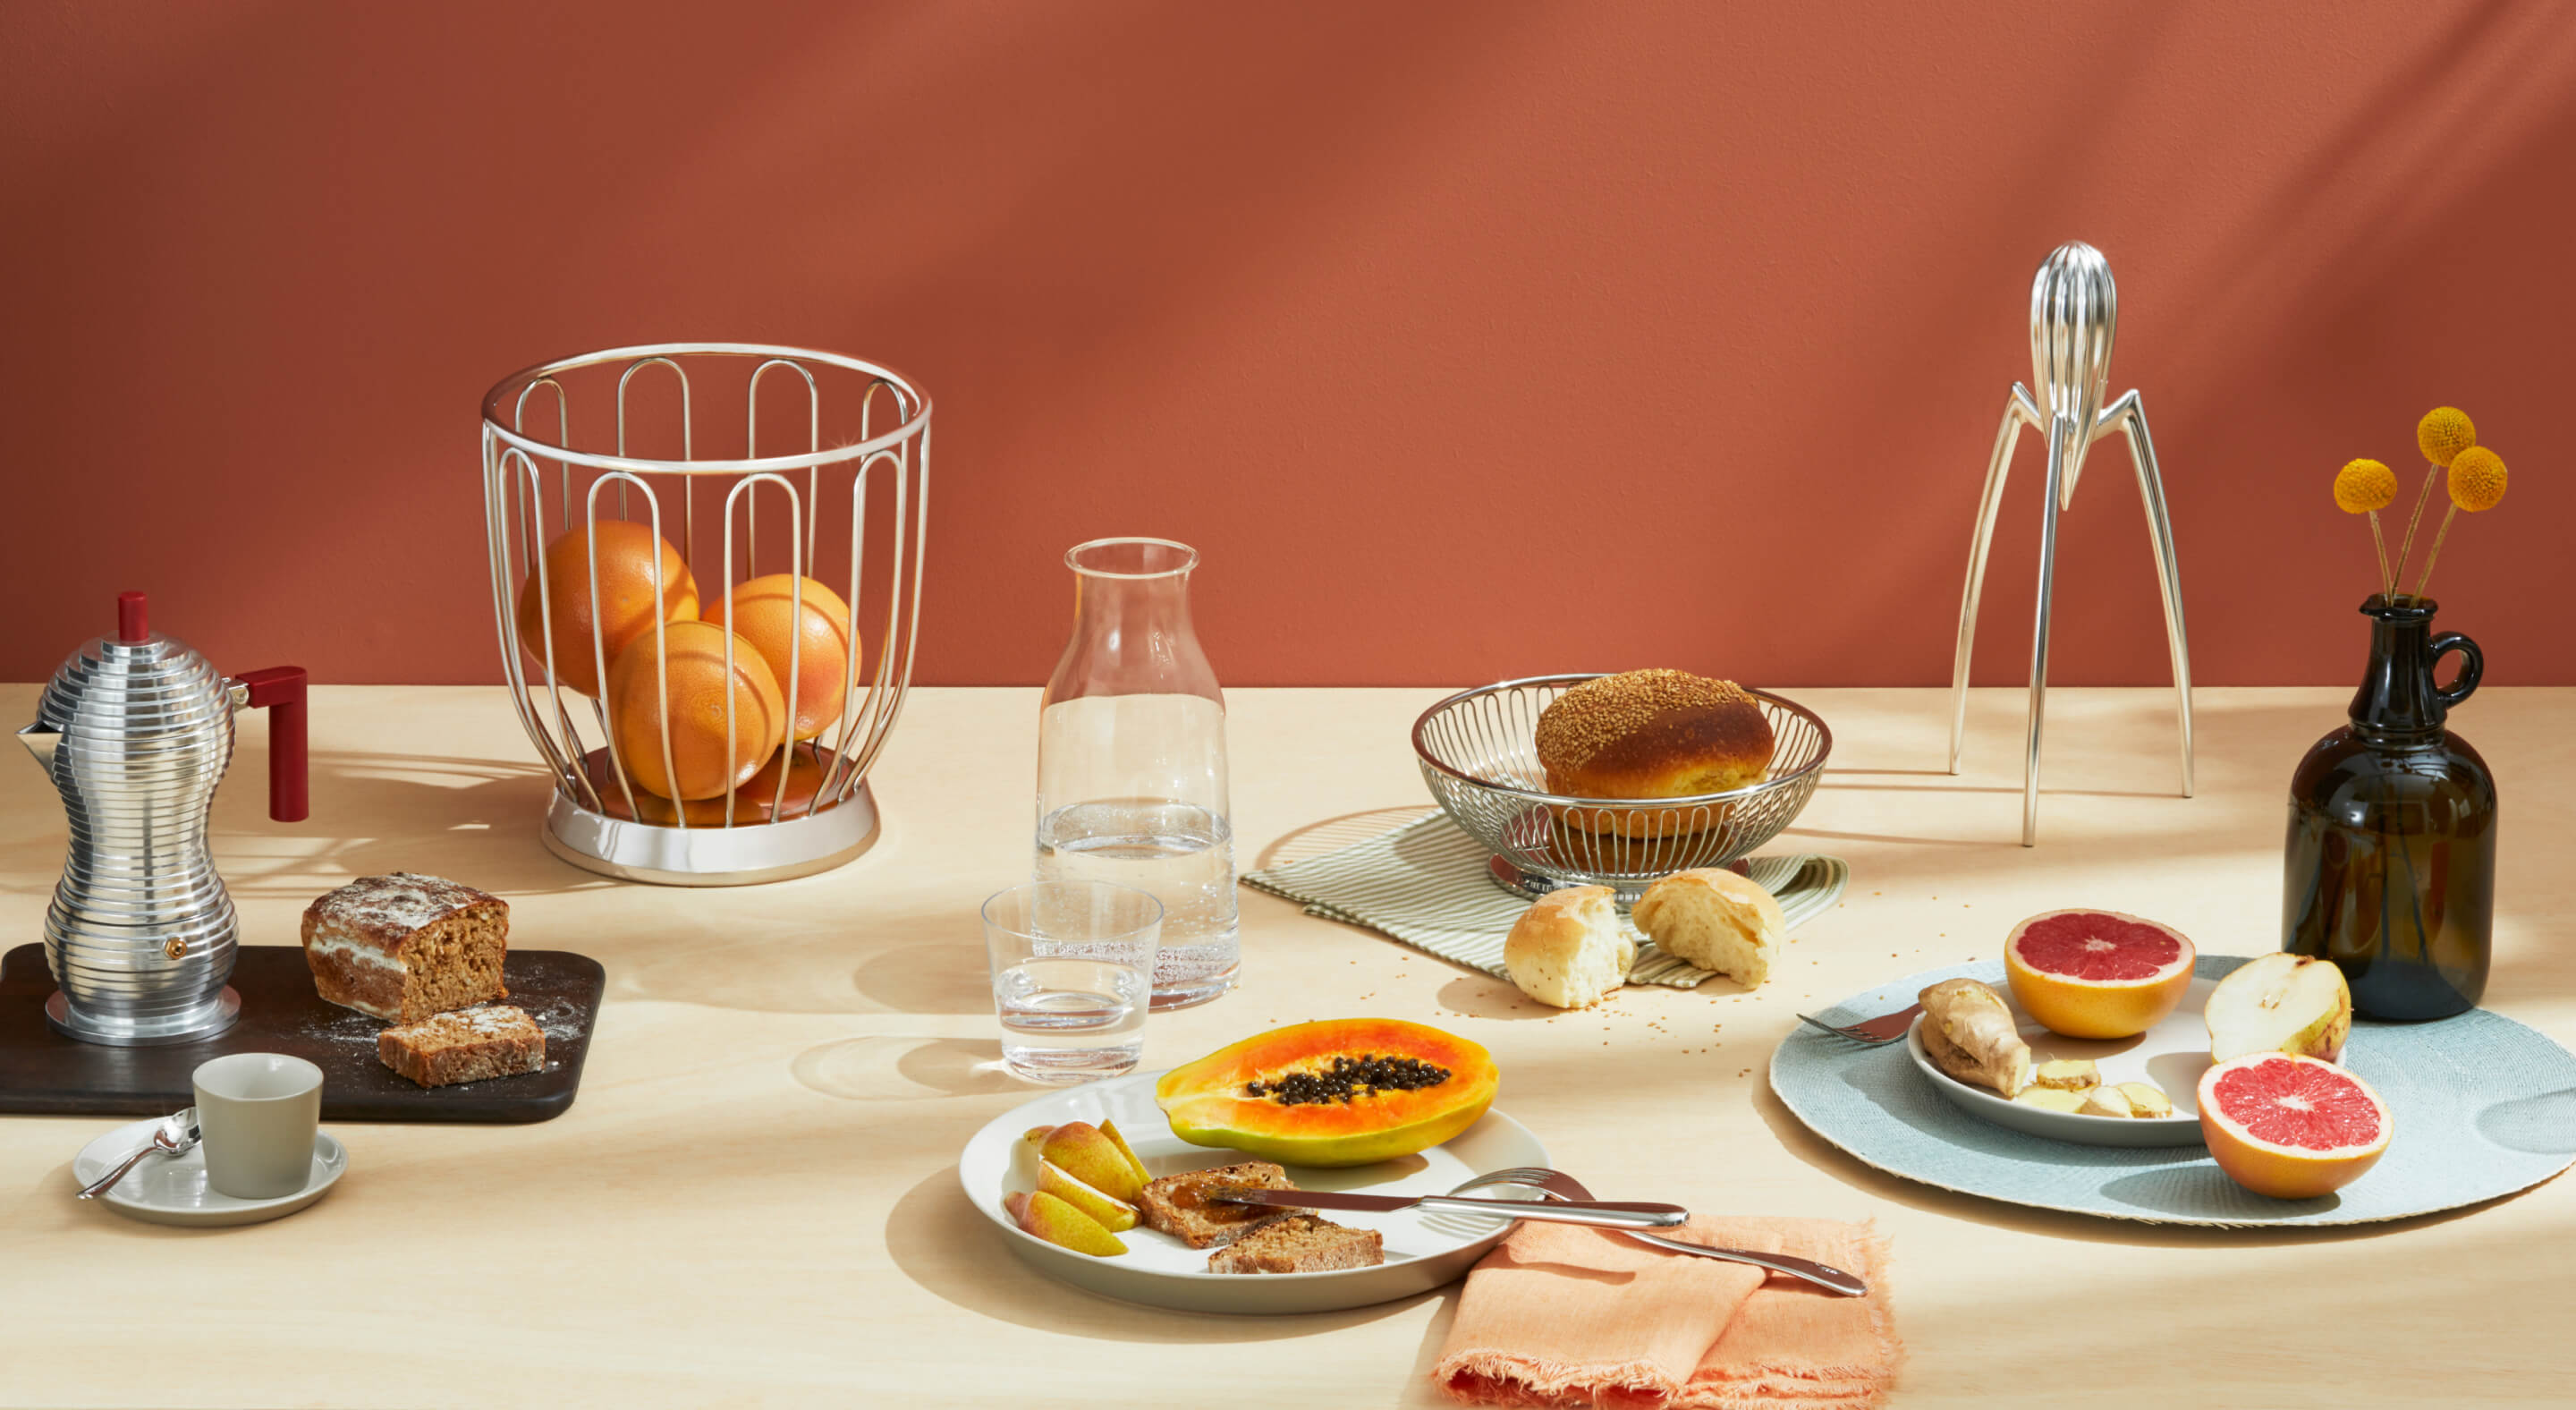 A table set with a breakfast spread served on modern plates.